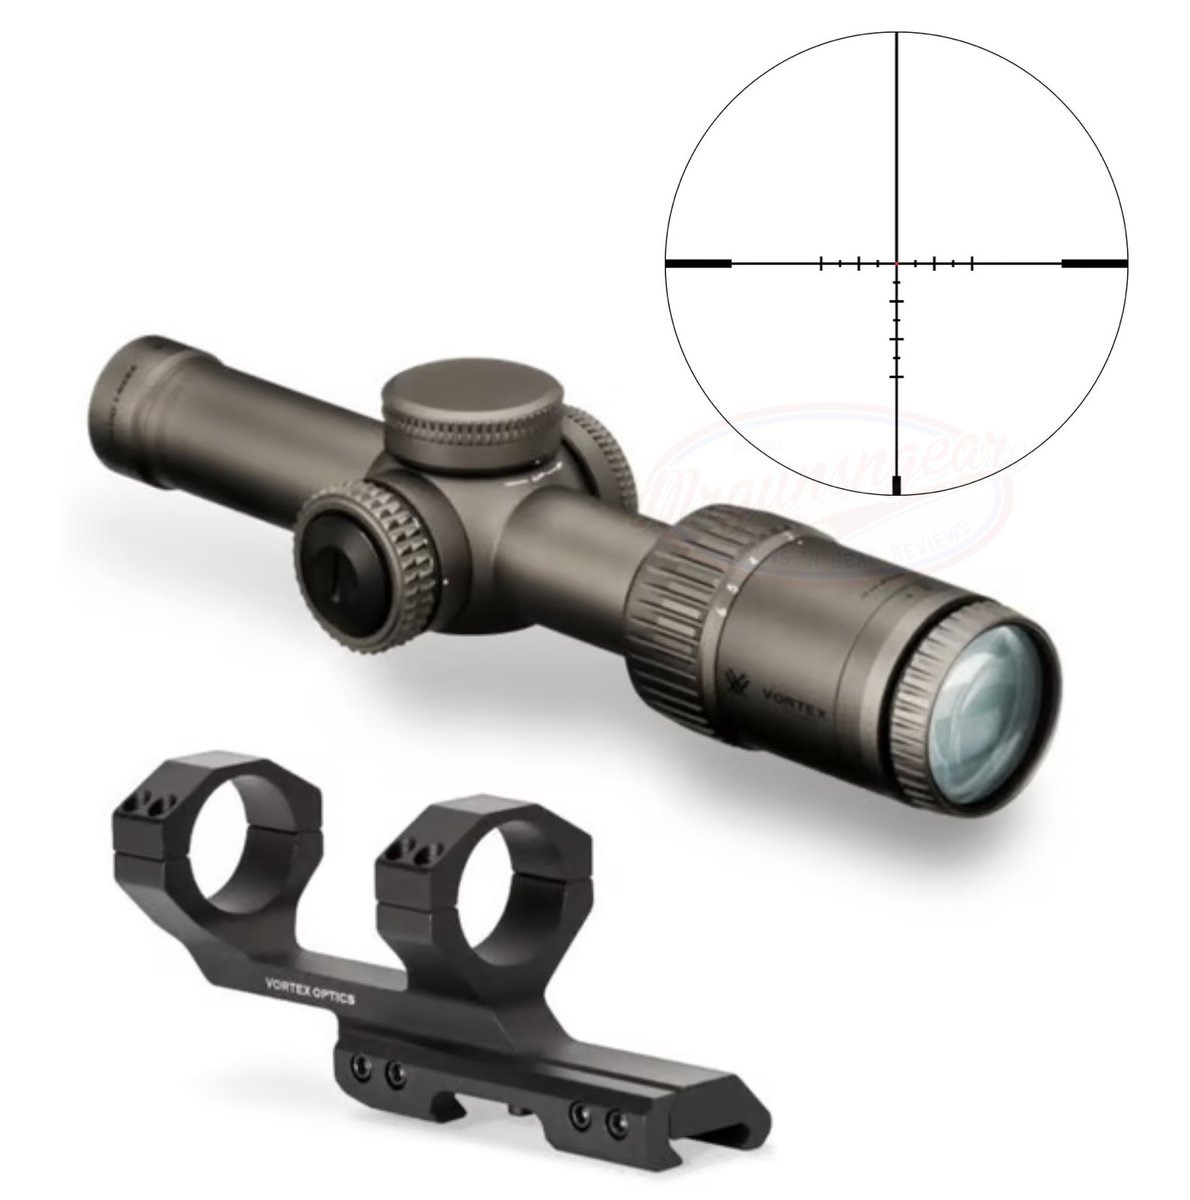 Vortex Razor HD Gen II-E 1-6x scope with VMR-2 MOA reticle with daylight bright dot, lifetime warranty, and Vortex cantilever mount for $999 shipped with code 'FCBANGER' currently here: mrgunsngear.org/3TmM2sH Review is up on the channel; cheapest I can recall seeing it